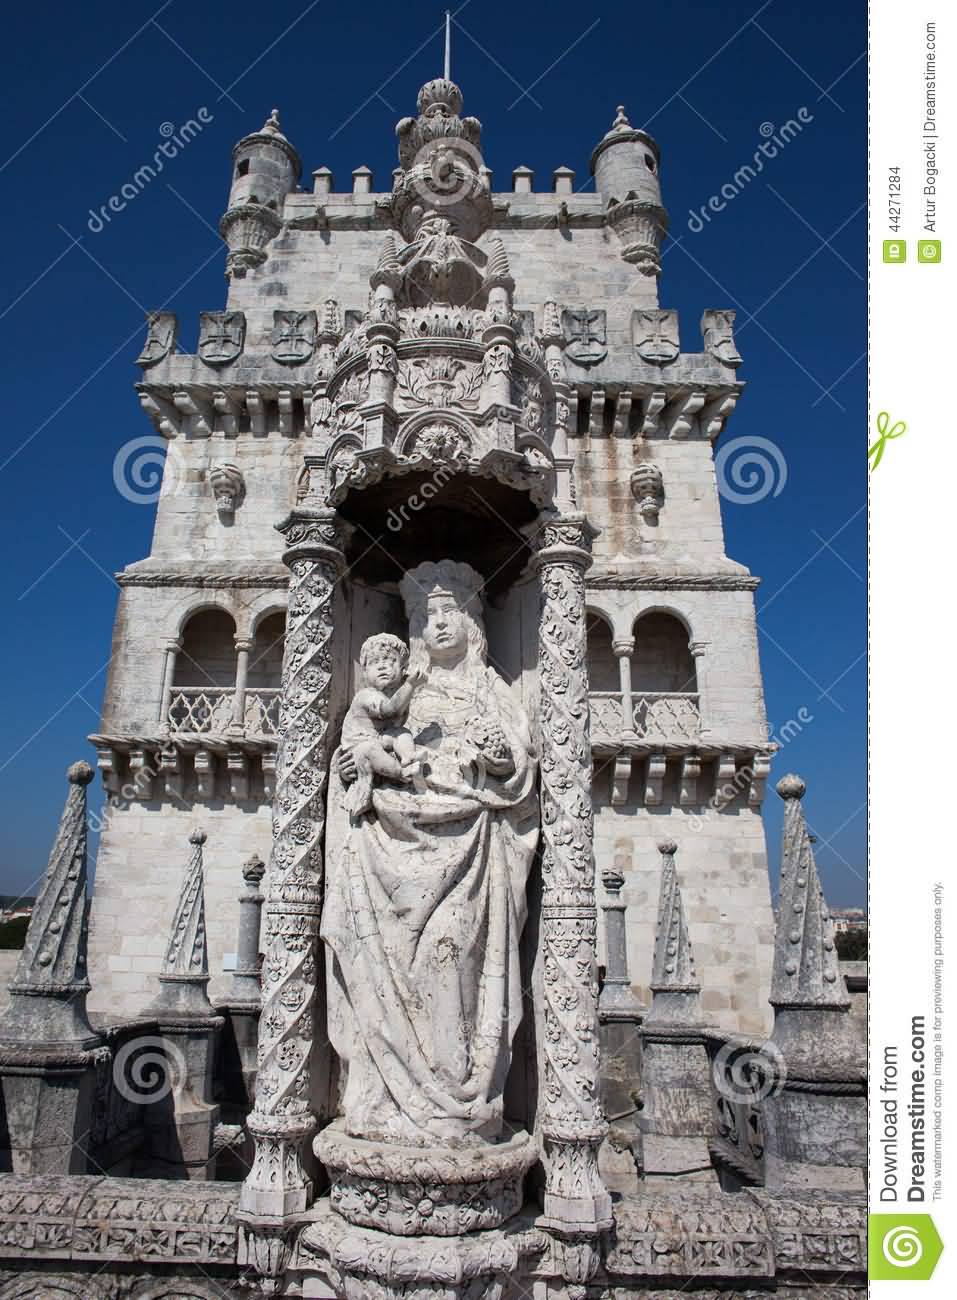 Statue Of St. Marry And Child At Belem Tower In Portugal